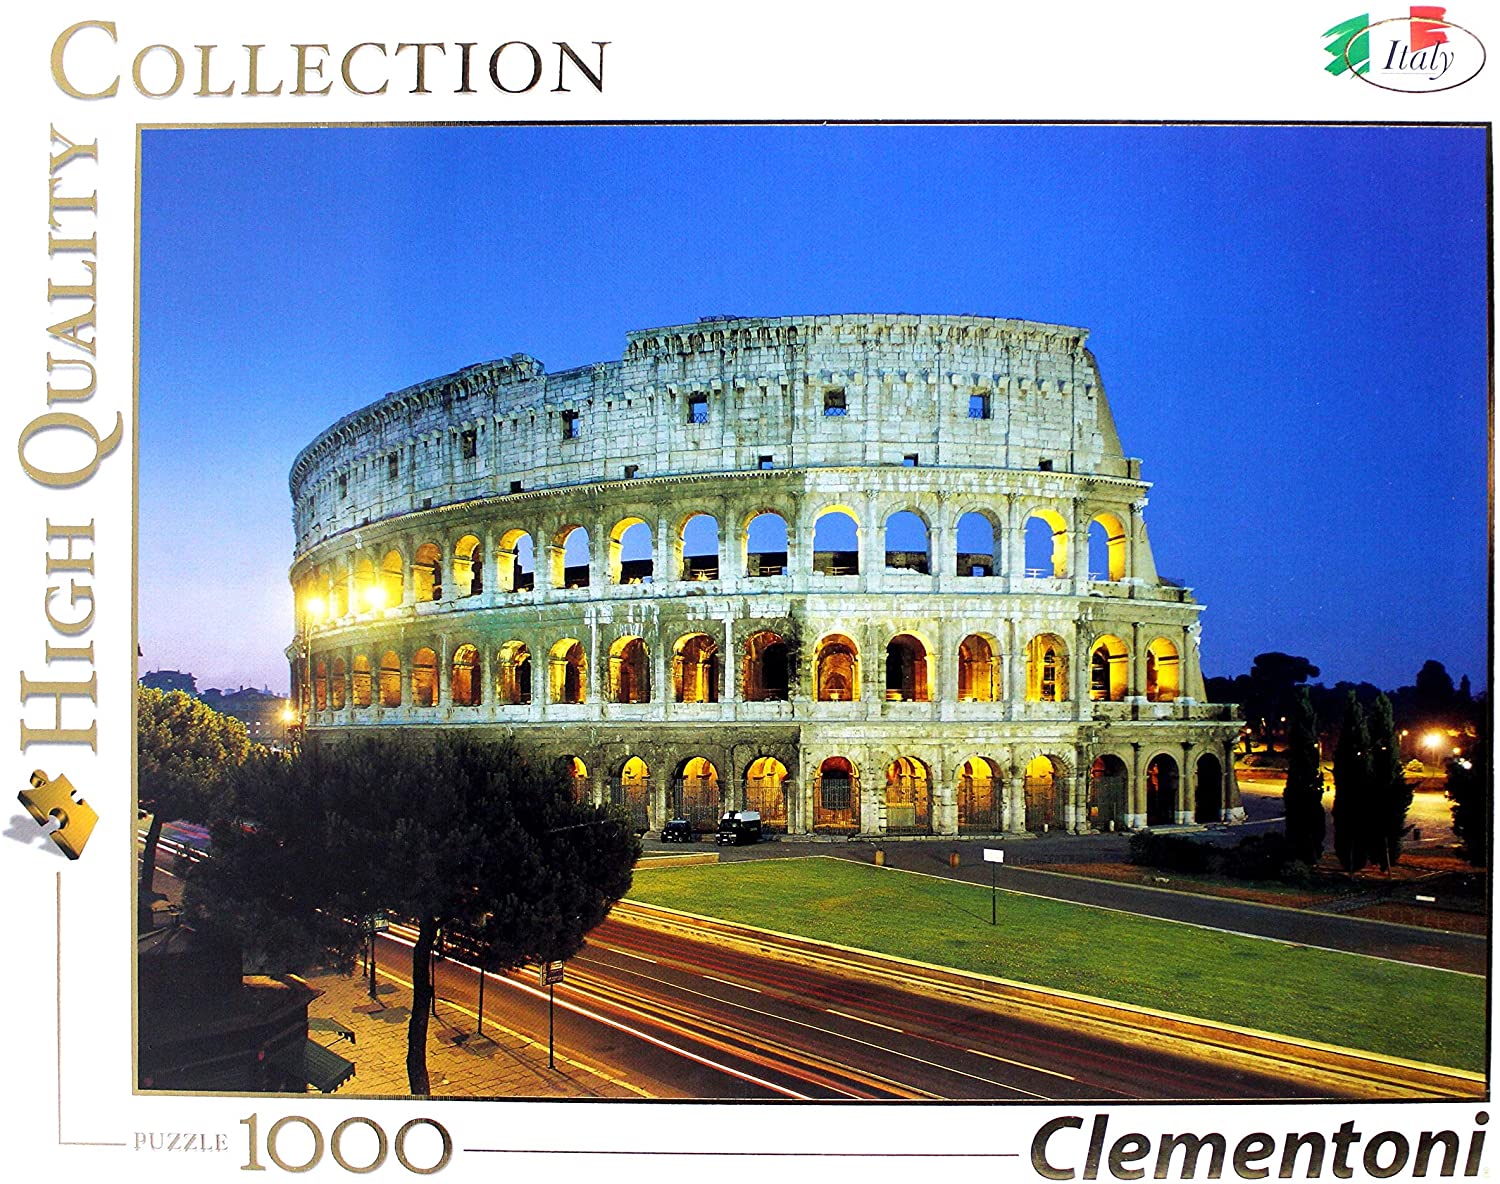 CLEMENTONI - BOARD GAME - 1000PCS - HIGH QUALITY COLLECTION - PUZZLE - MOD: CLM39457